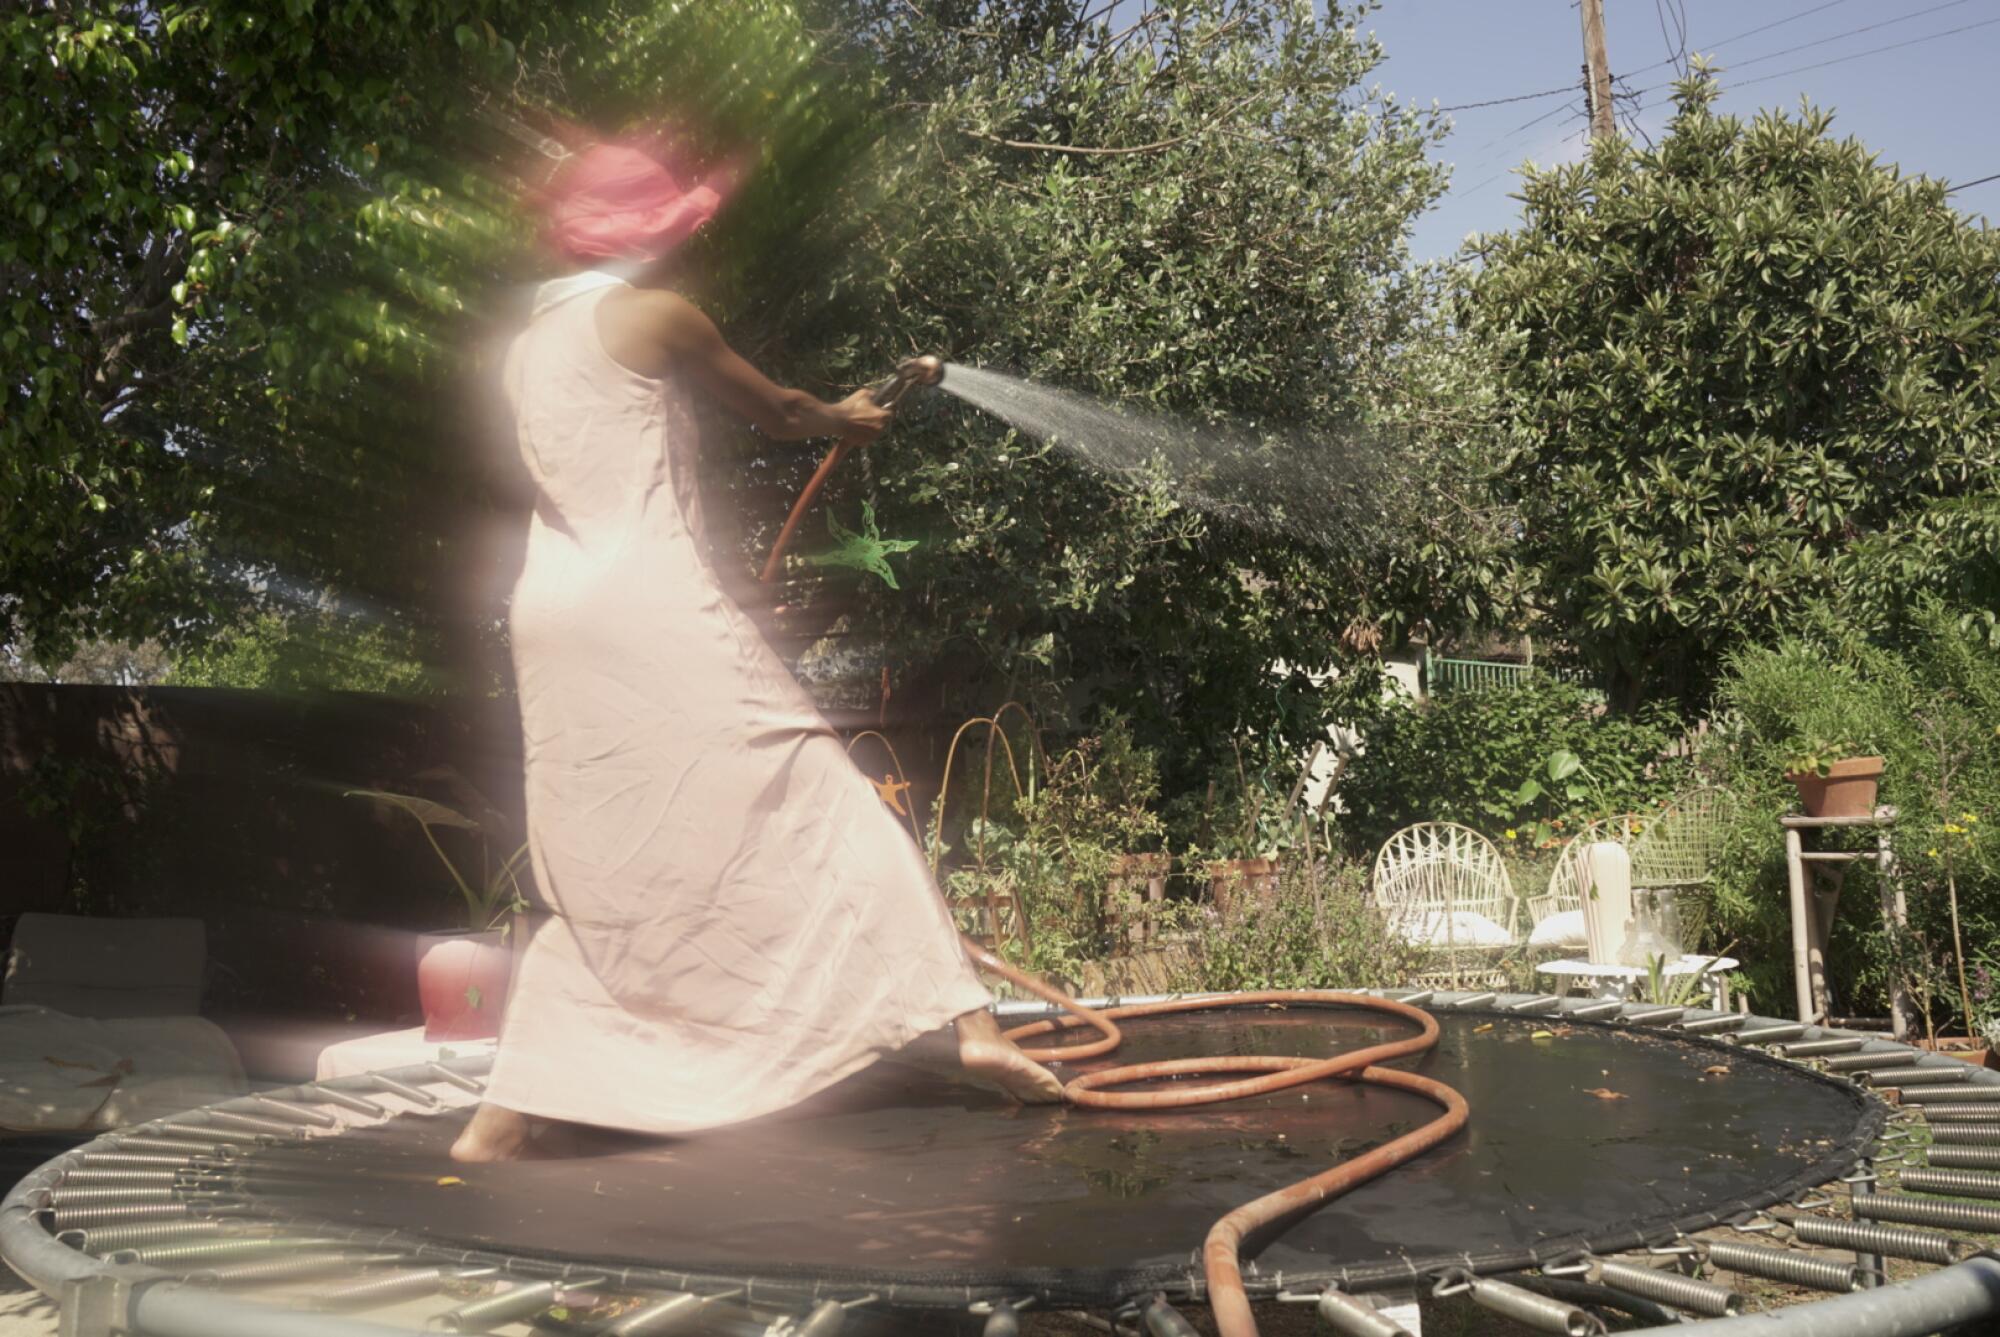 A woman in a long light-colored dress and hat stands on a trampoline spraying plants with a hose.